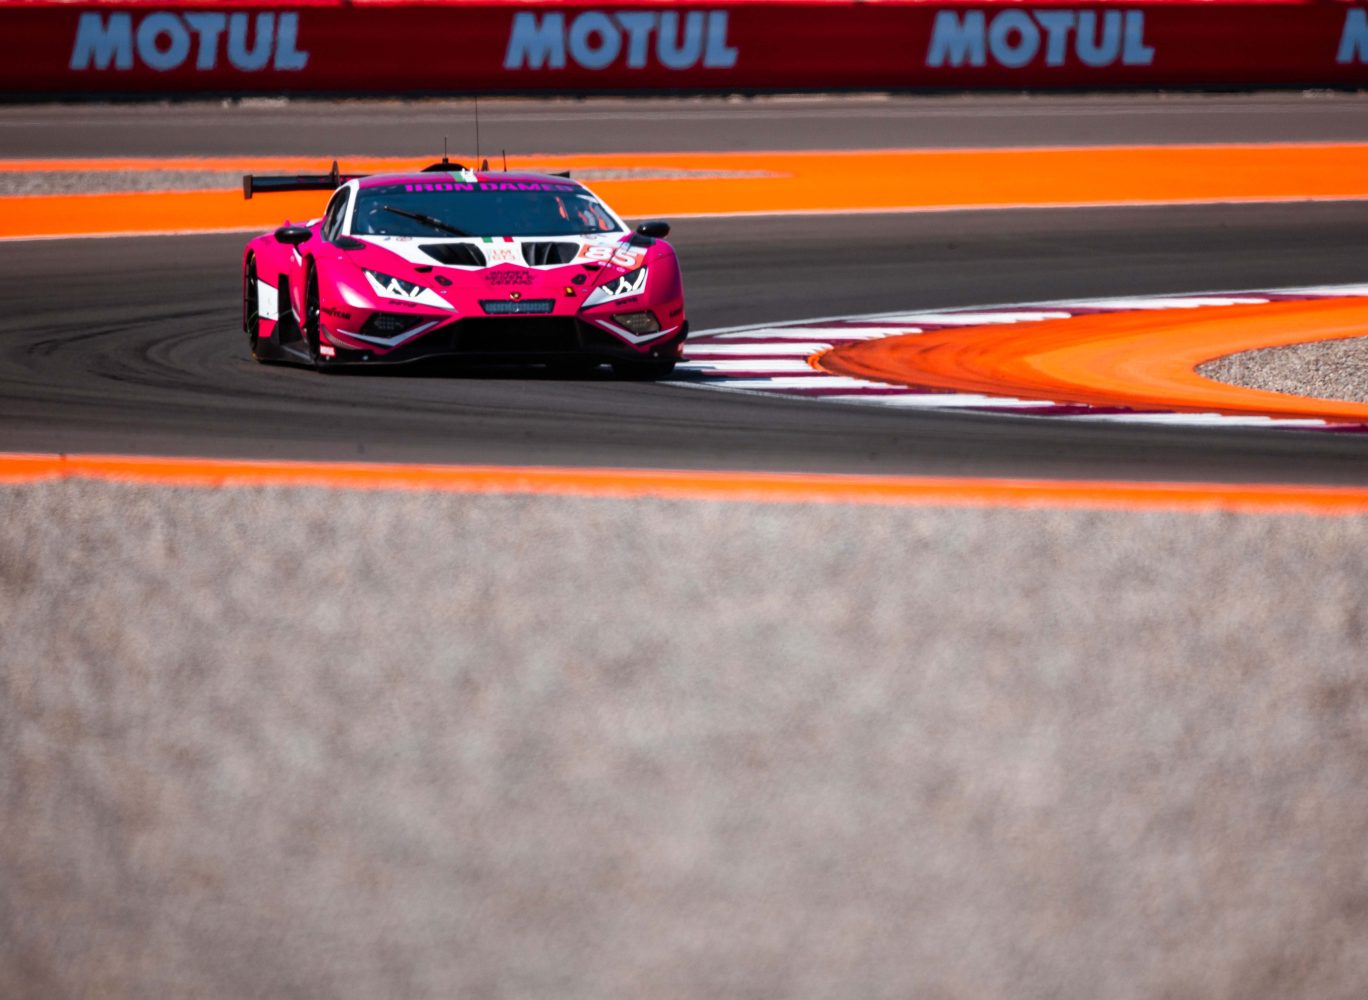 THE IRON DAMES AND MOTUL PUSH THE BOUNDARIES TOGETHER FOR THE 2024 WEC SEASON